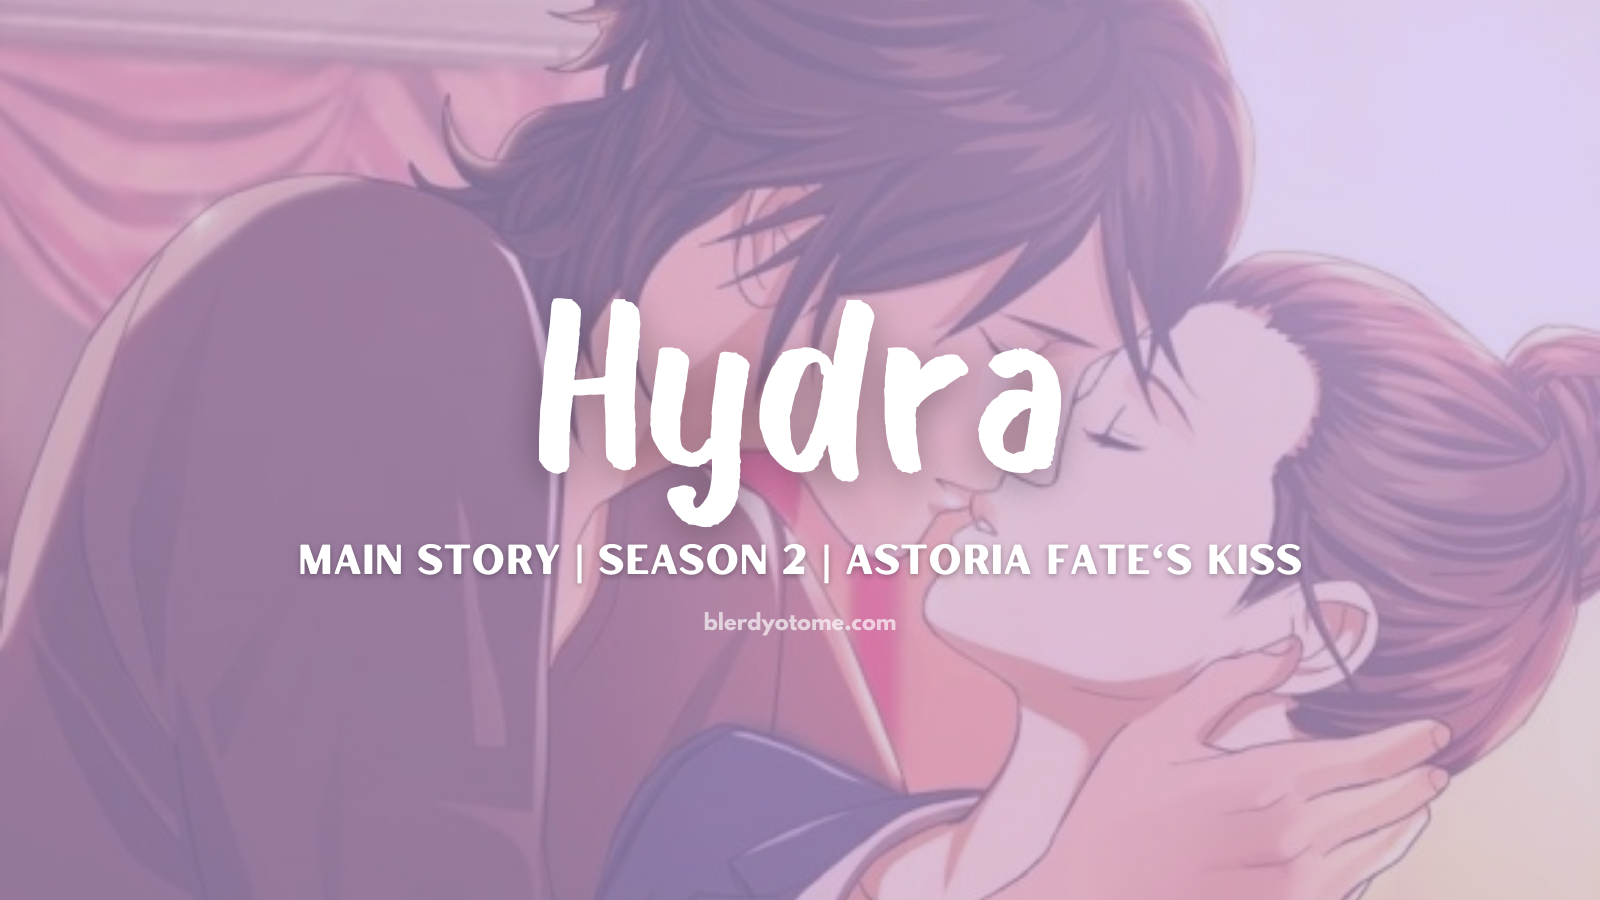 Astoria Fates Kiss | Hydra Season 2 Review: My Lover is an Ice Cold Criminal